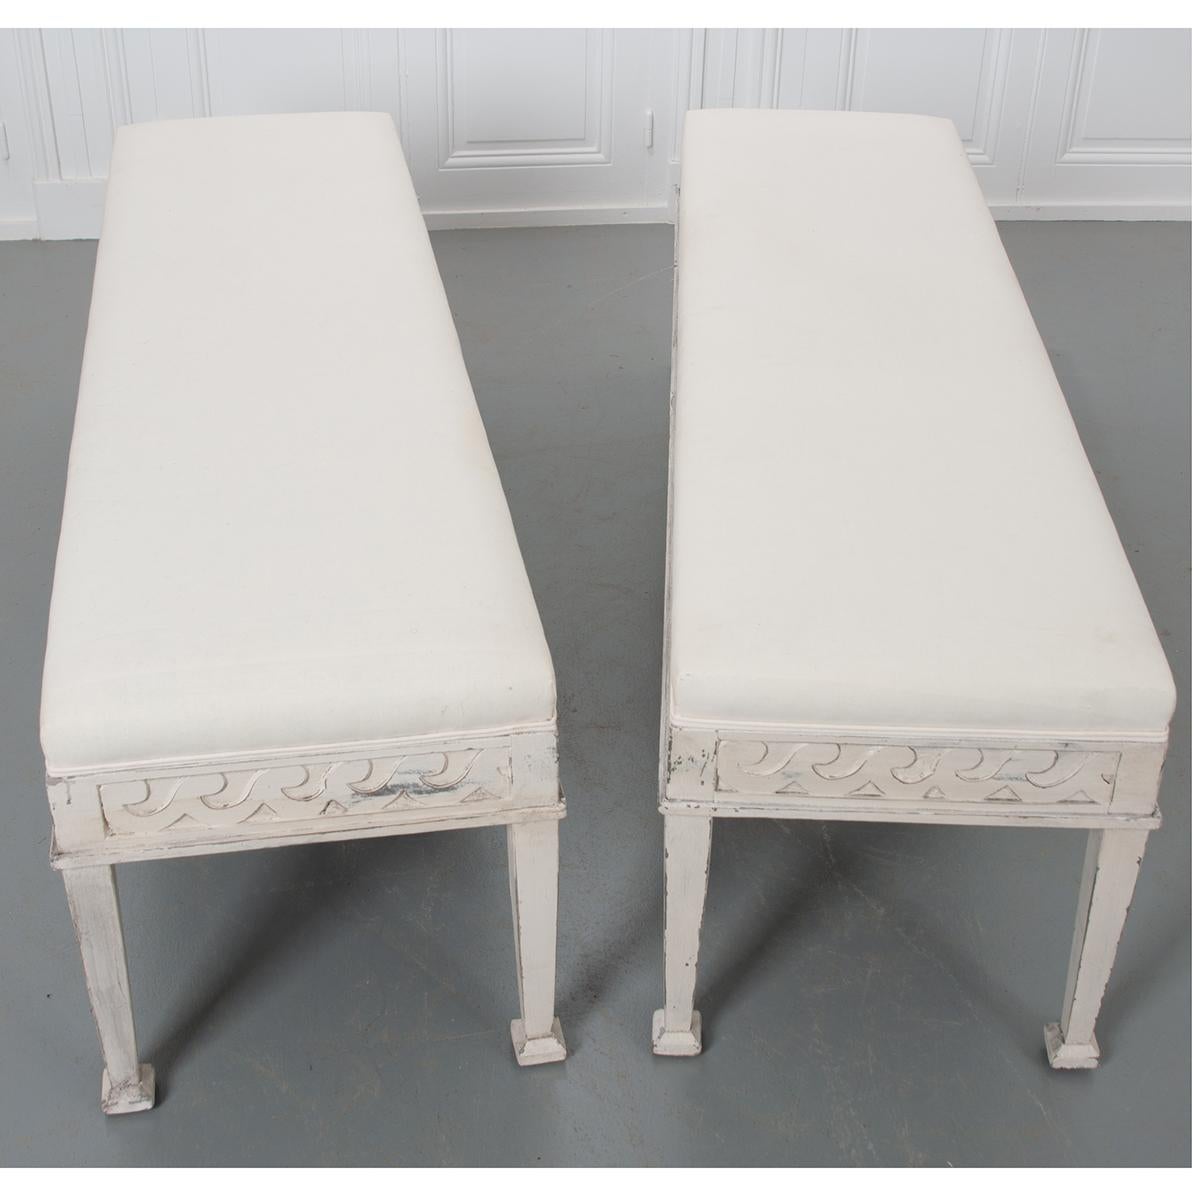 This fantastic pair of painted reproduction benches, features upholstered cushions resting upon an apron with a Vitruvian scroll design. The whole is raised on six tapered legs with shaped feet.